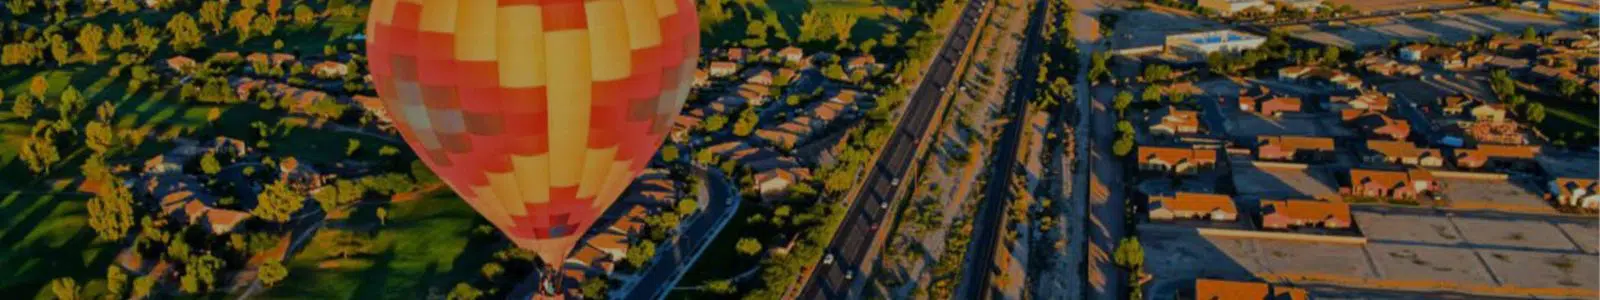 Aztec-style red and yellow hot air balloon above suburbs at evening